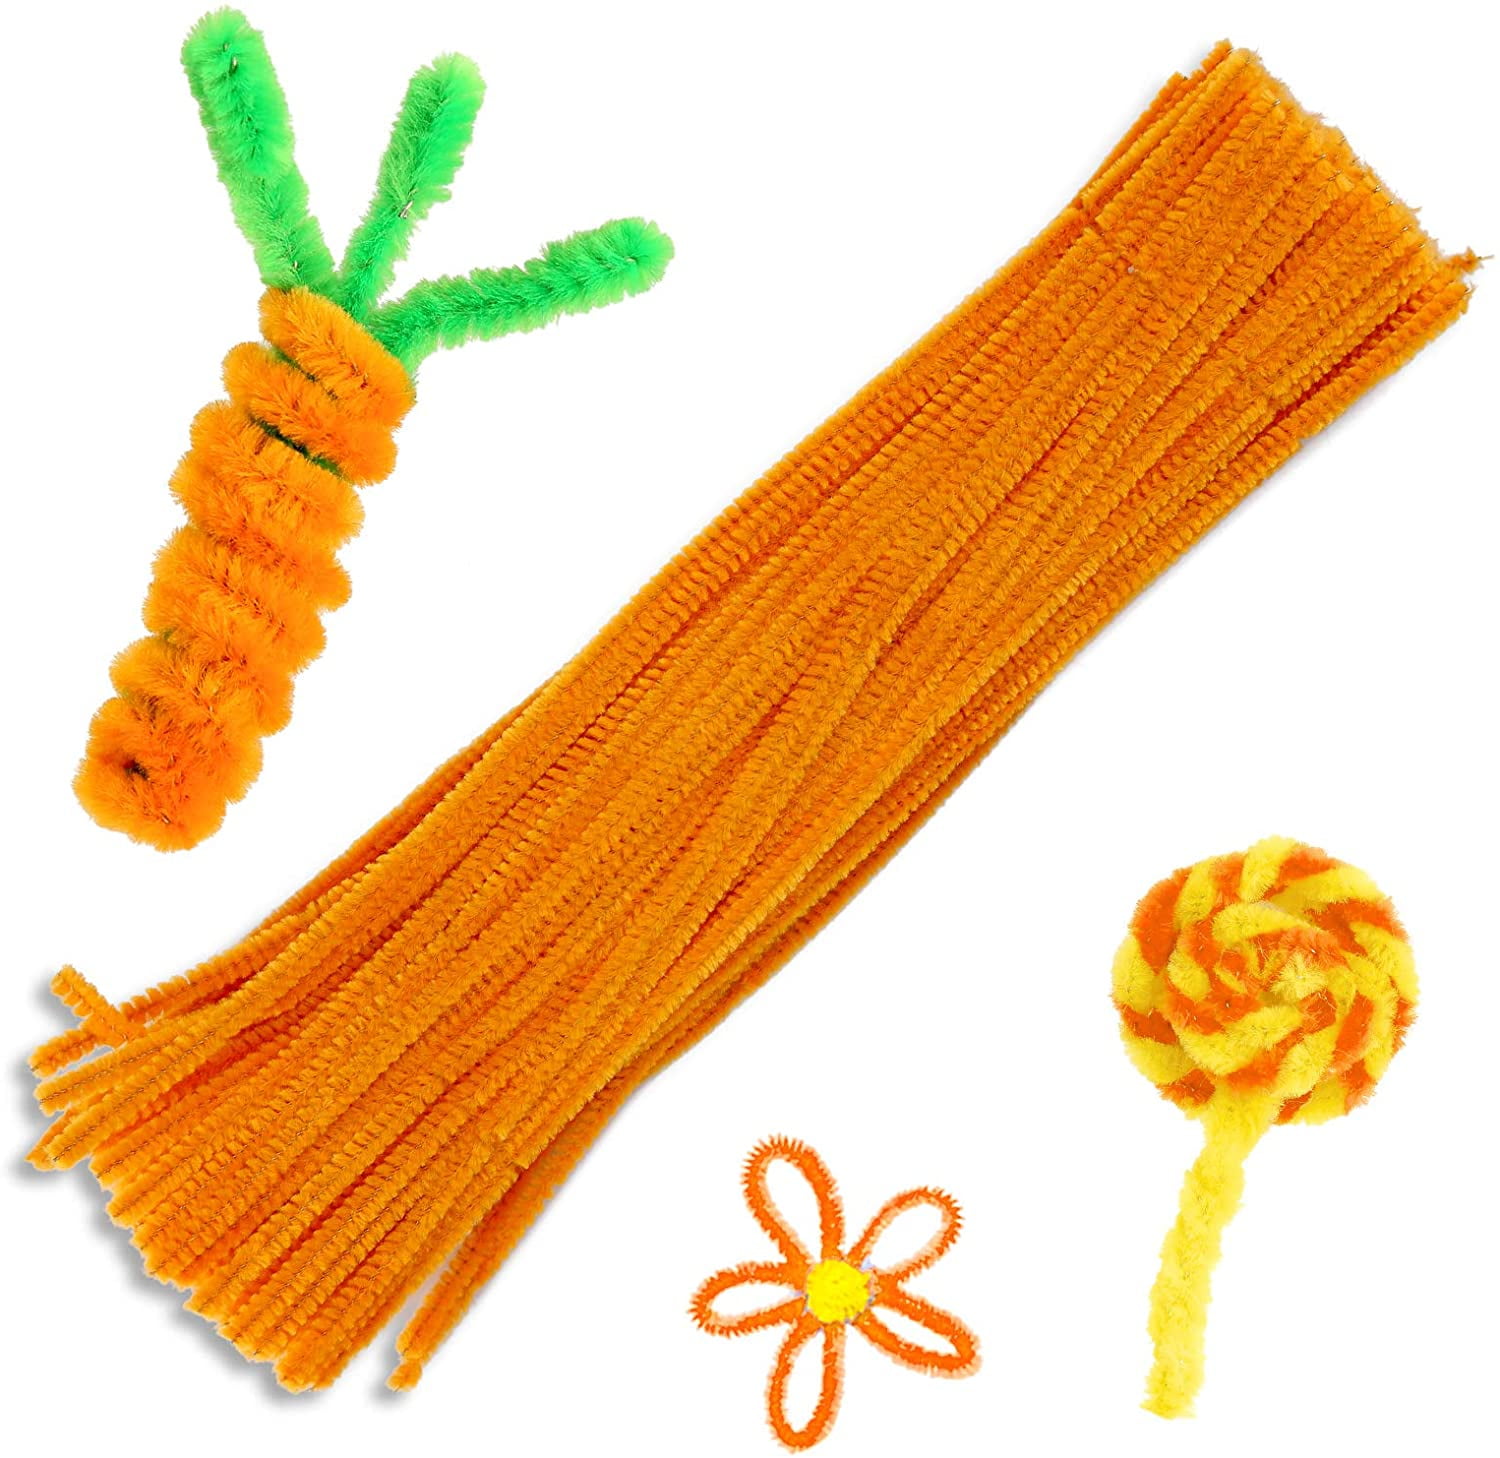 Colorations IPCGR Green Chenille Stem Pipe Cleaners, Pack of 100, Arts &  Crafts, Decorating, STEM, Single Color, Activities for Kids, Crafting,  Straw